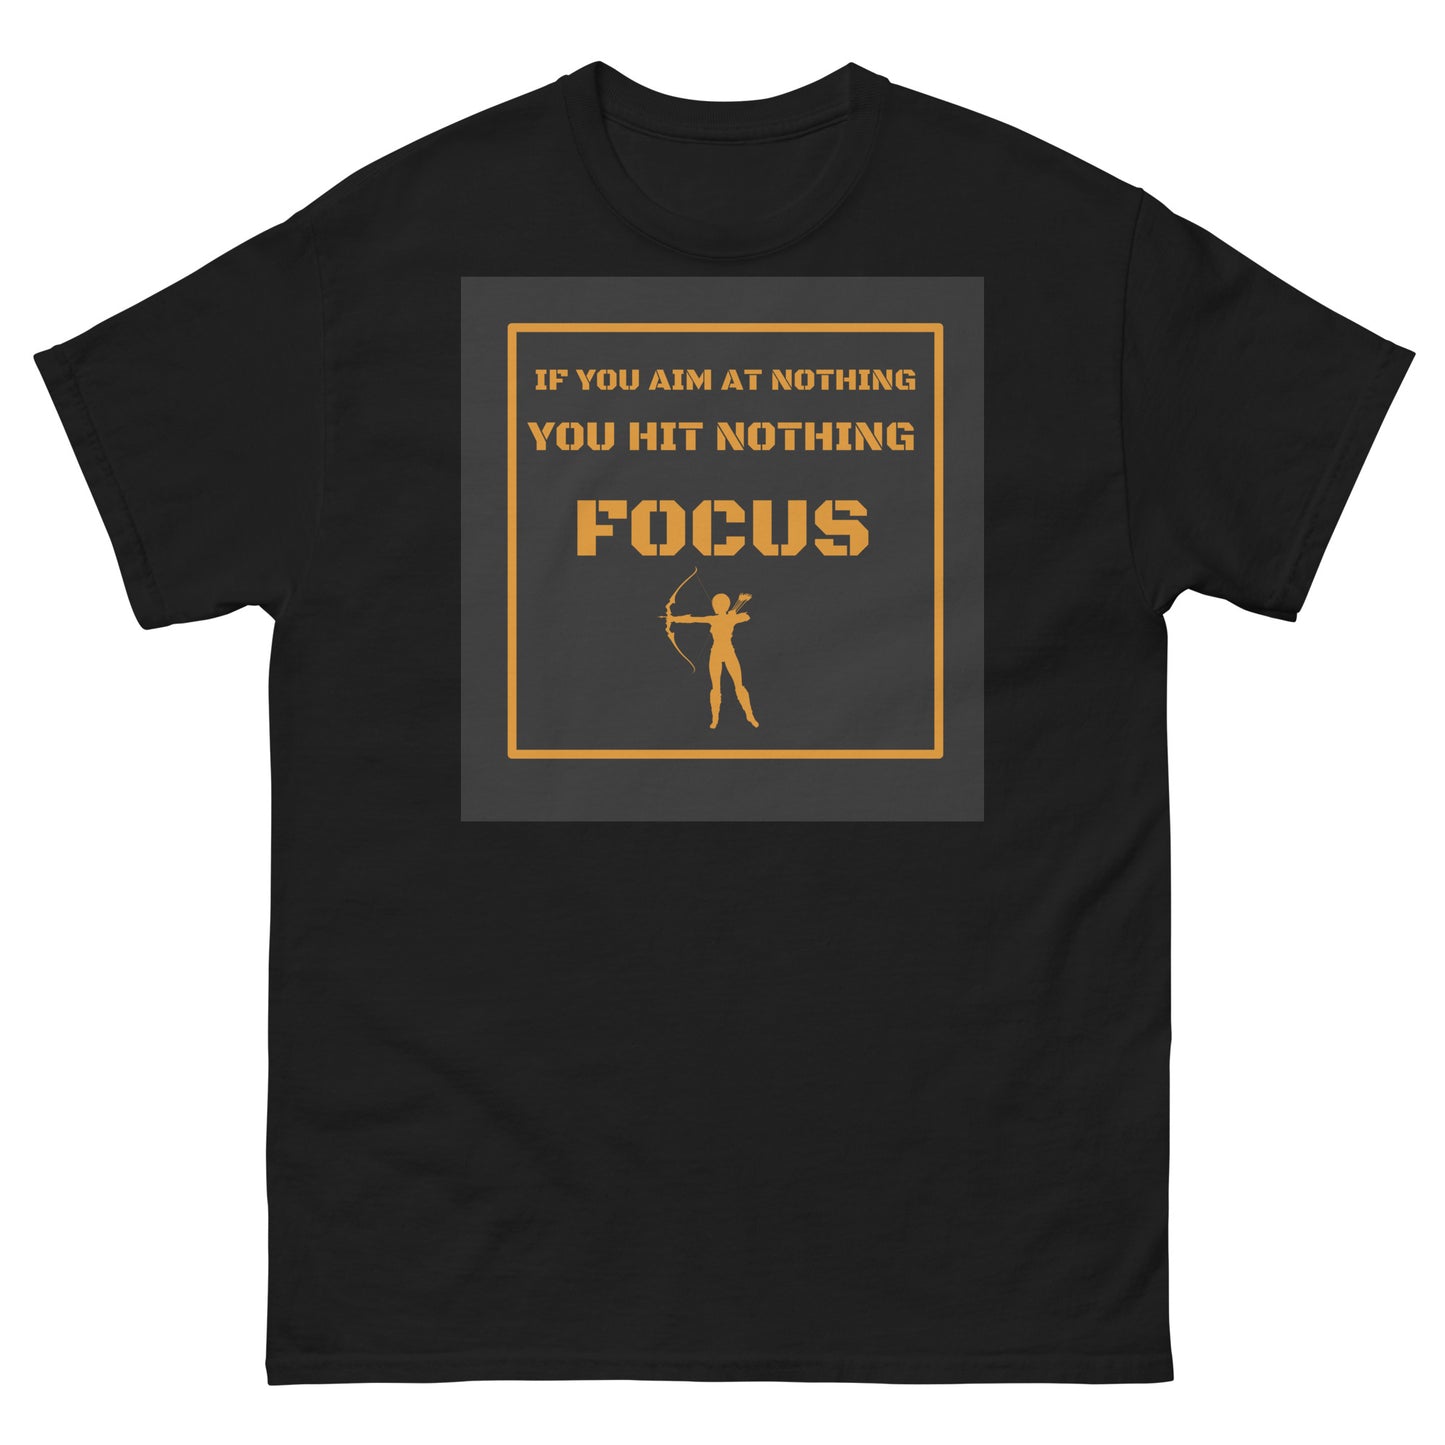 IF YOU AIM AT NOTHING YOU HIT NOTHING - Men's heavyweight tee